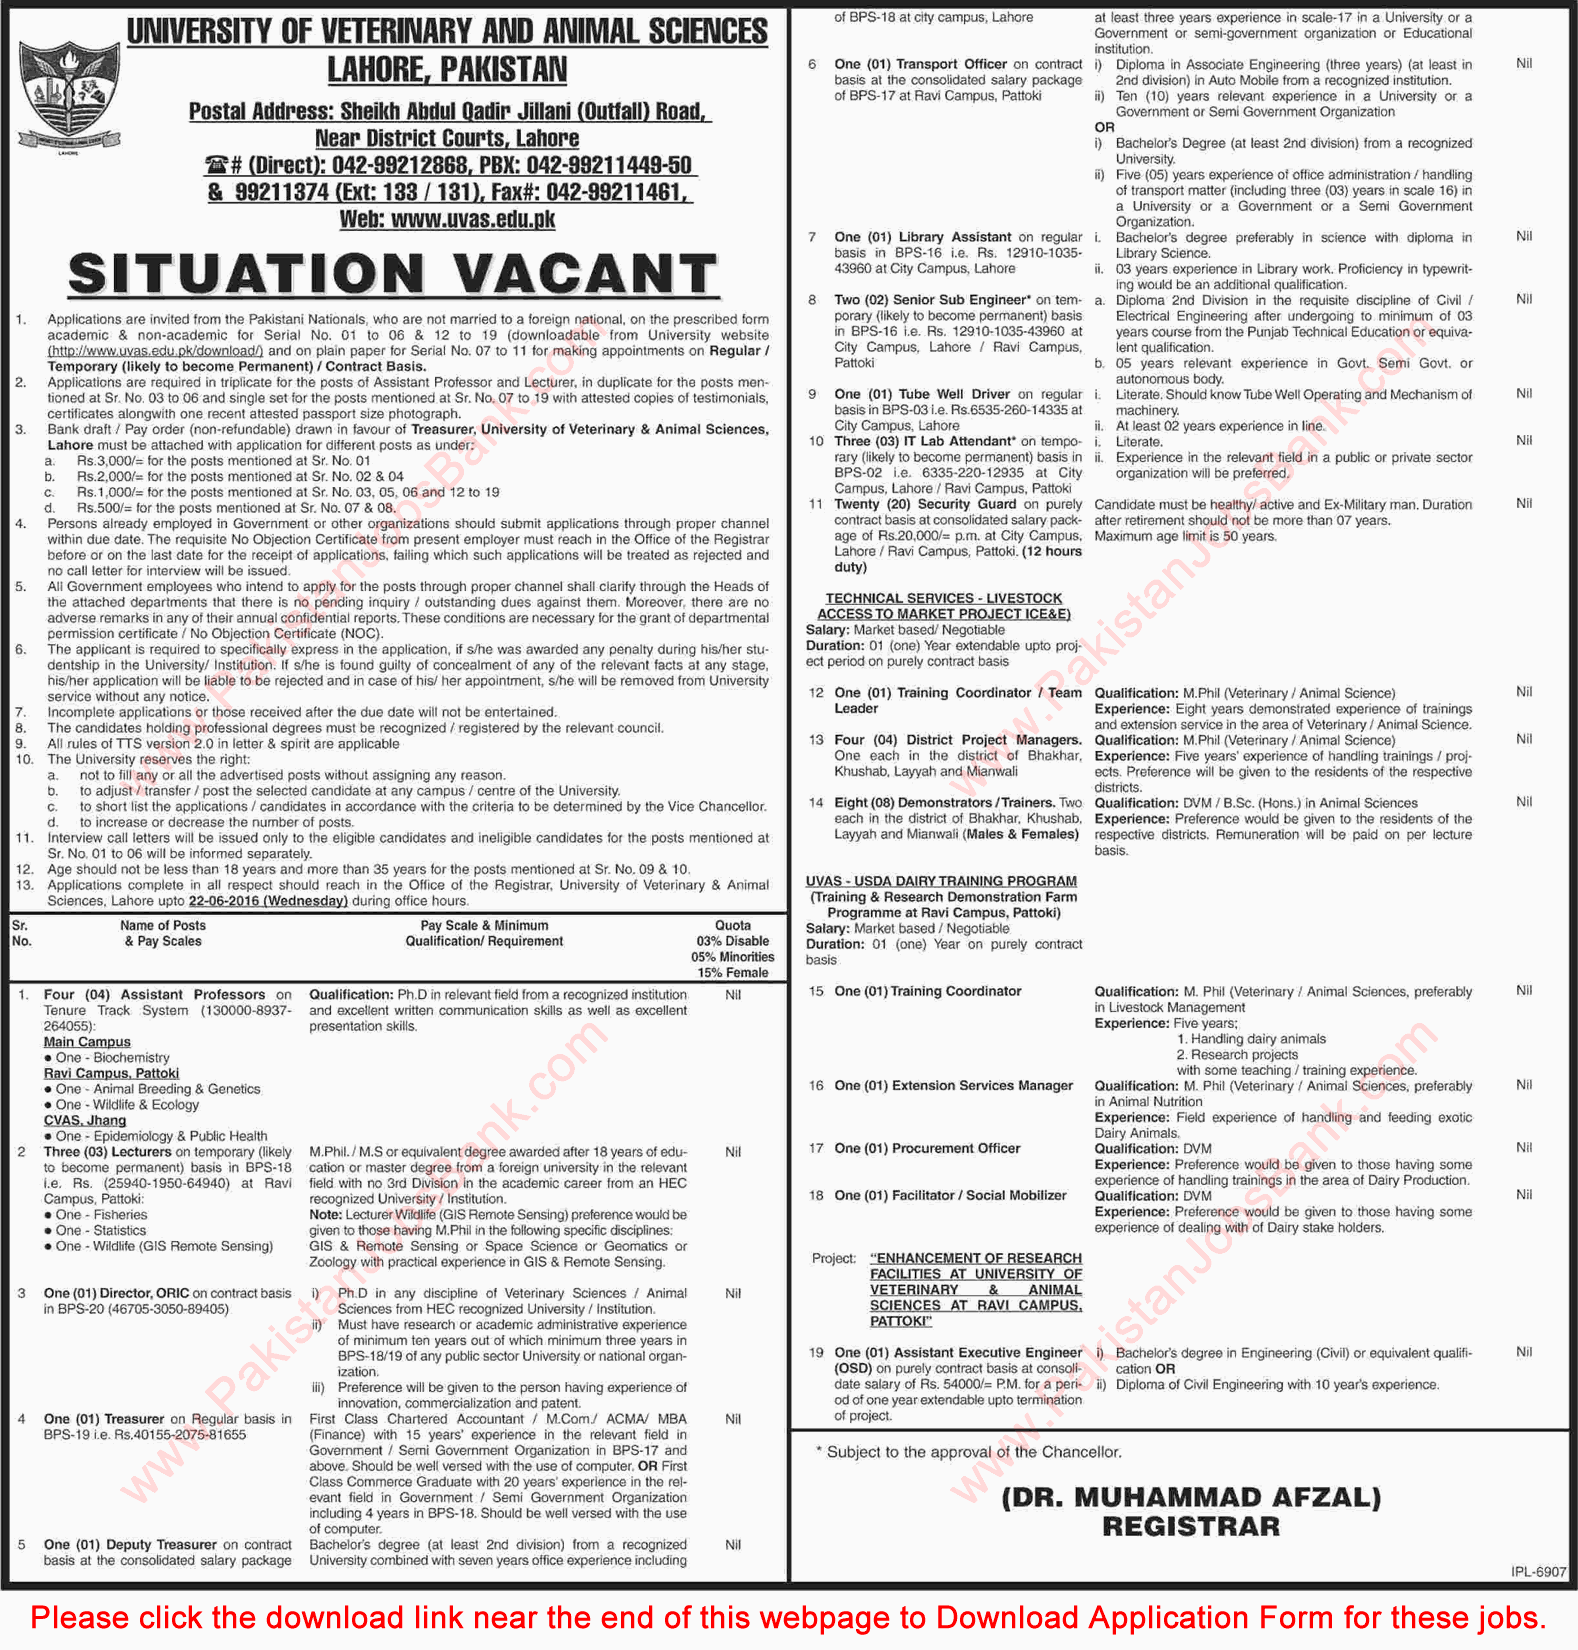 University of Veterinary and Animal Sciences Lahore Jobs July 2016 UVAS Application Form Download Latest